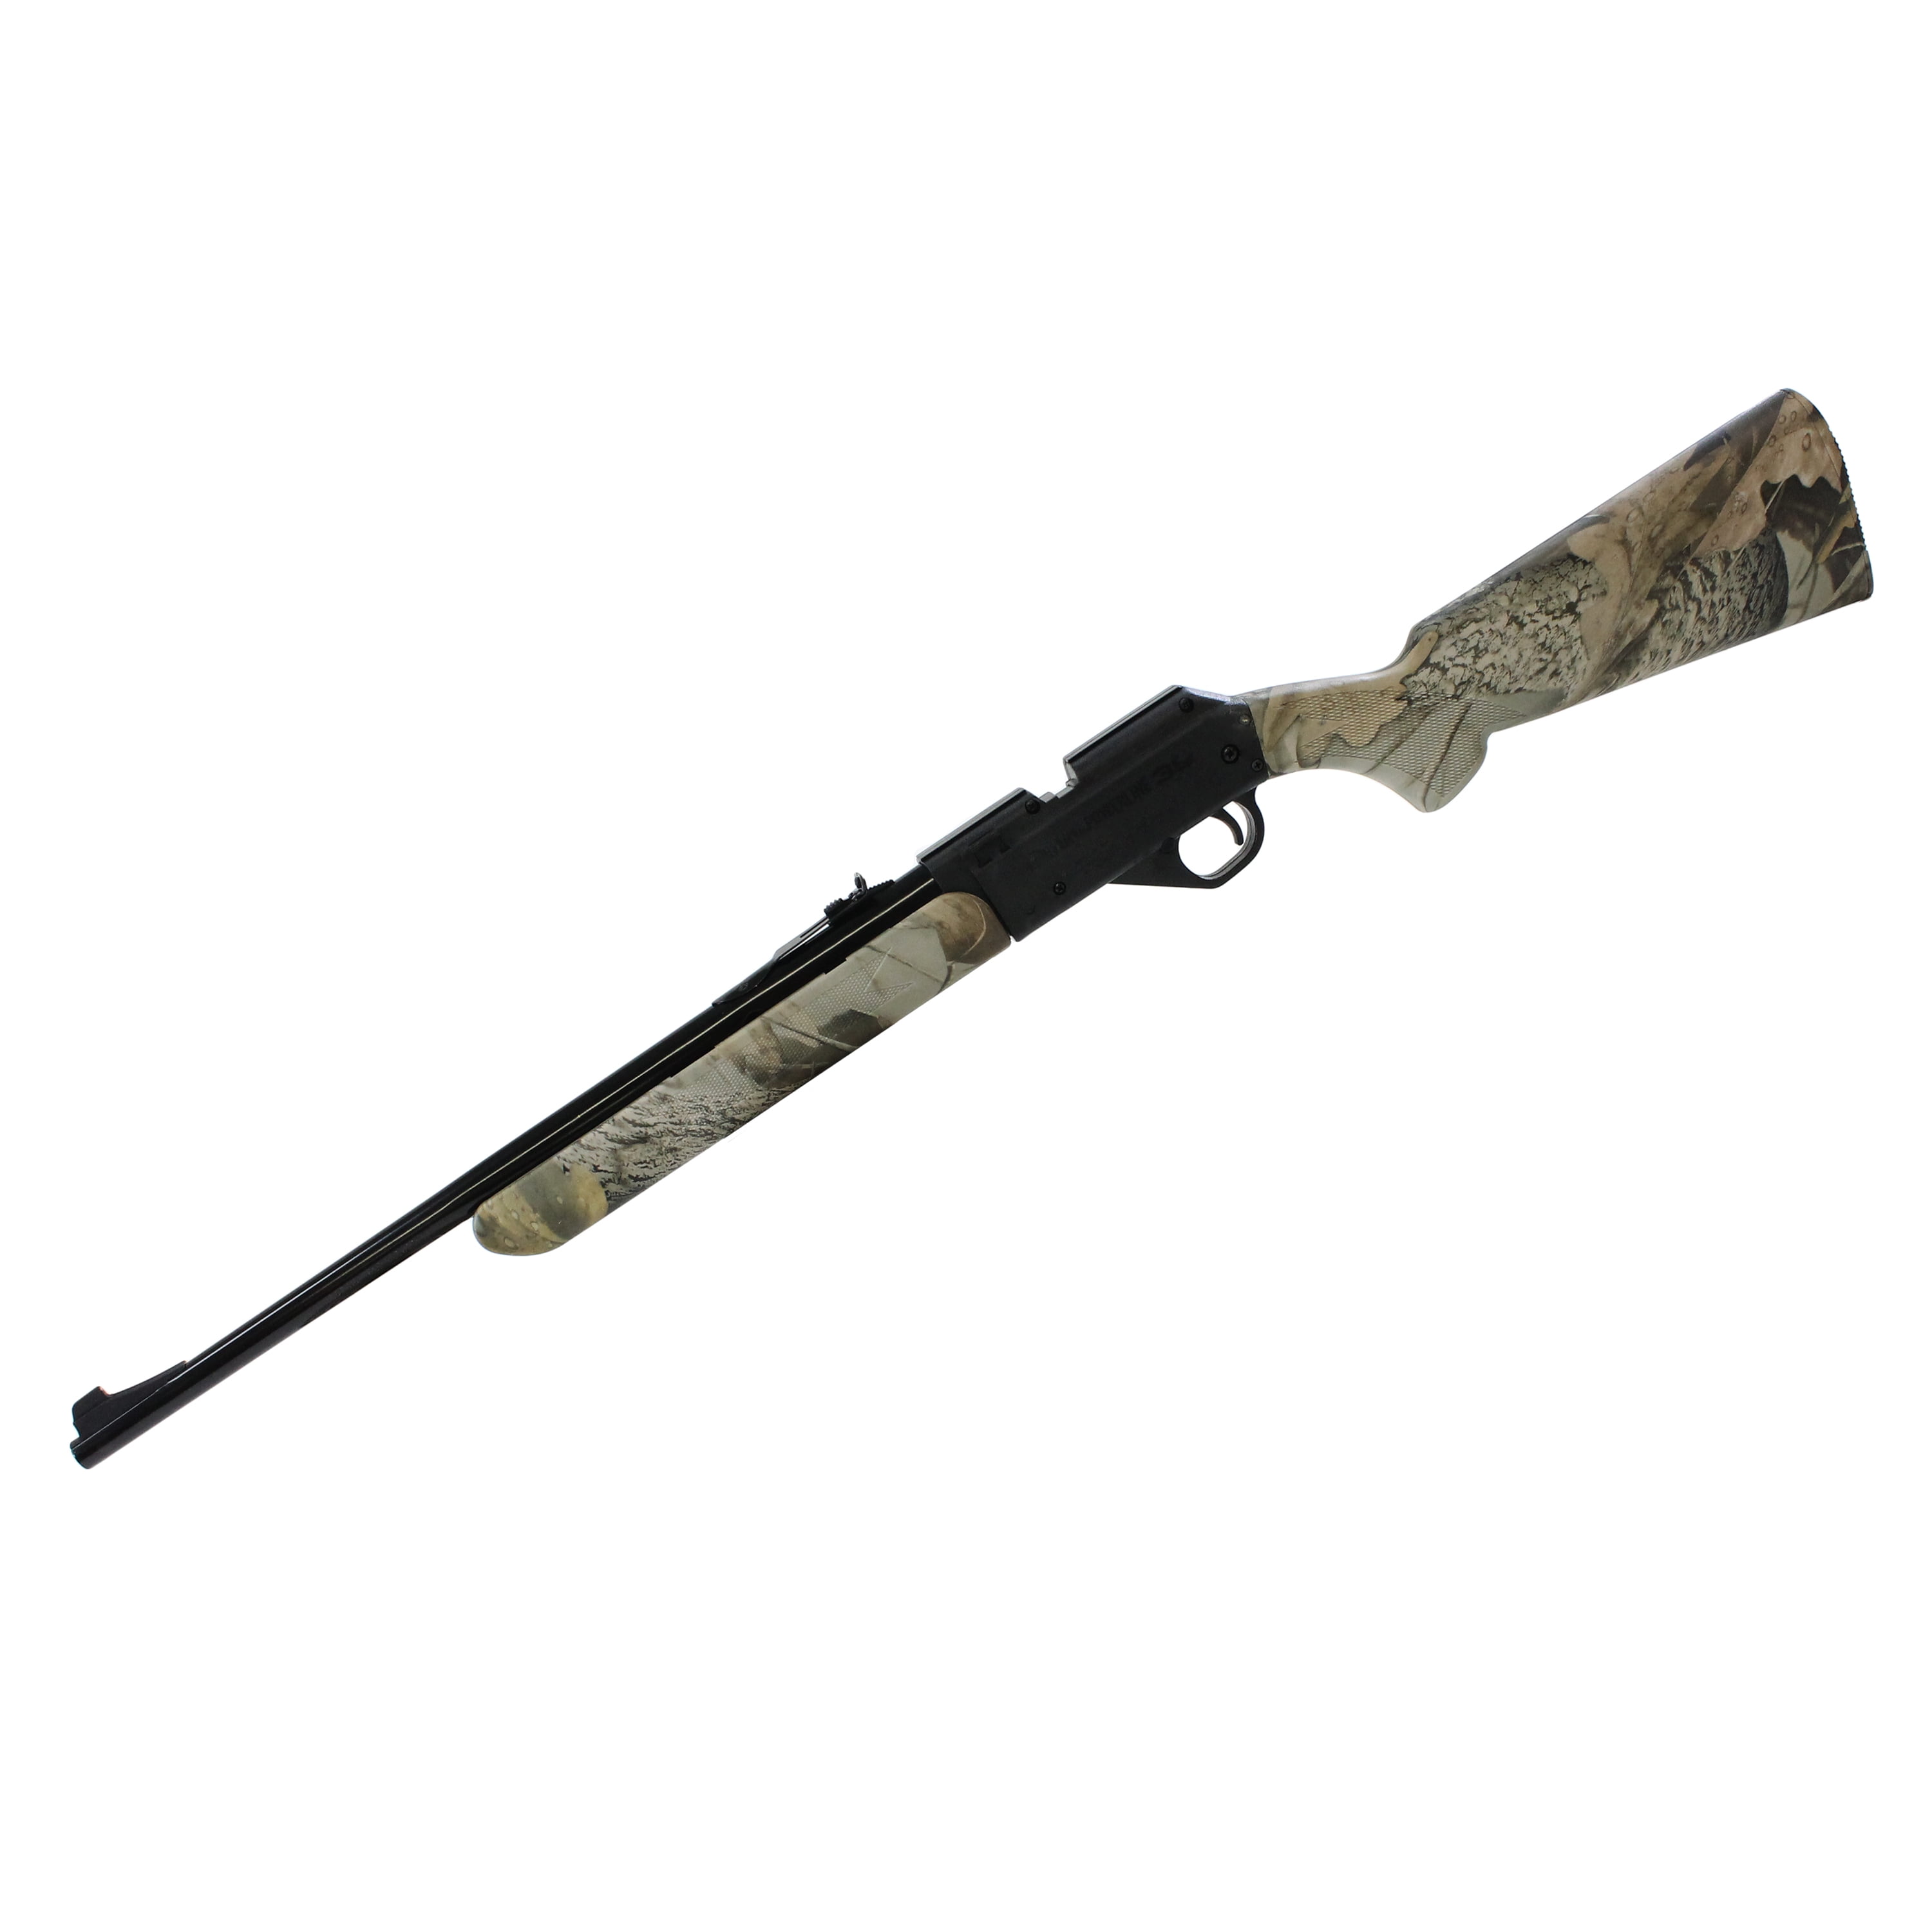 Rifle Model 35 Powerline Camo No 35ctb Daisy Outdoor Products for sale online 